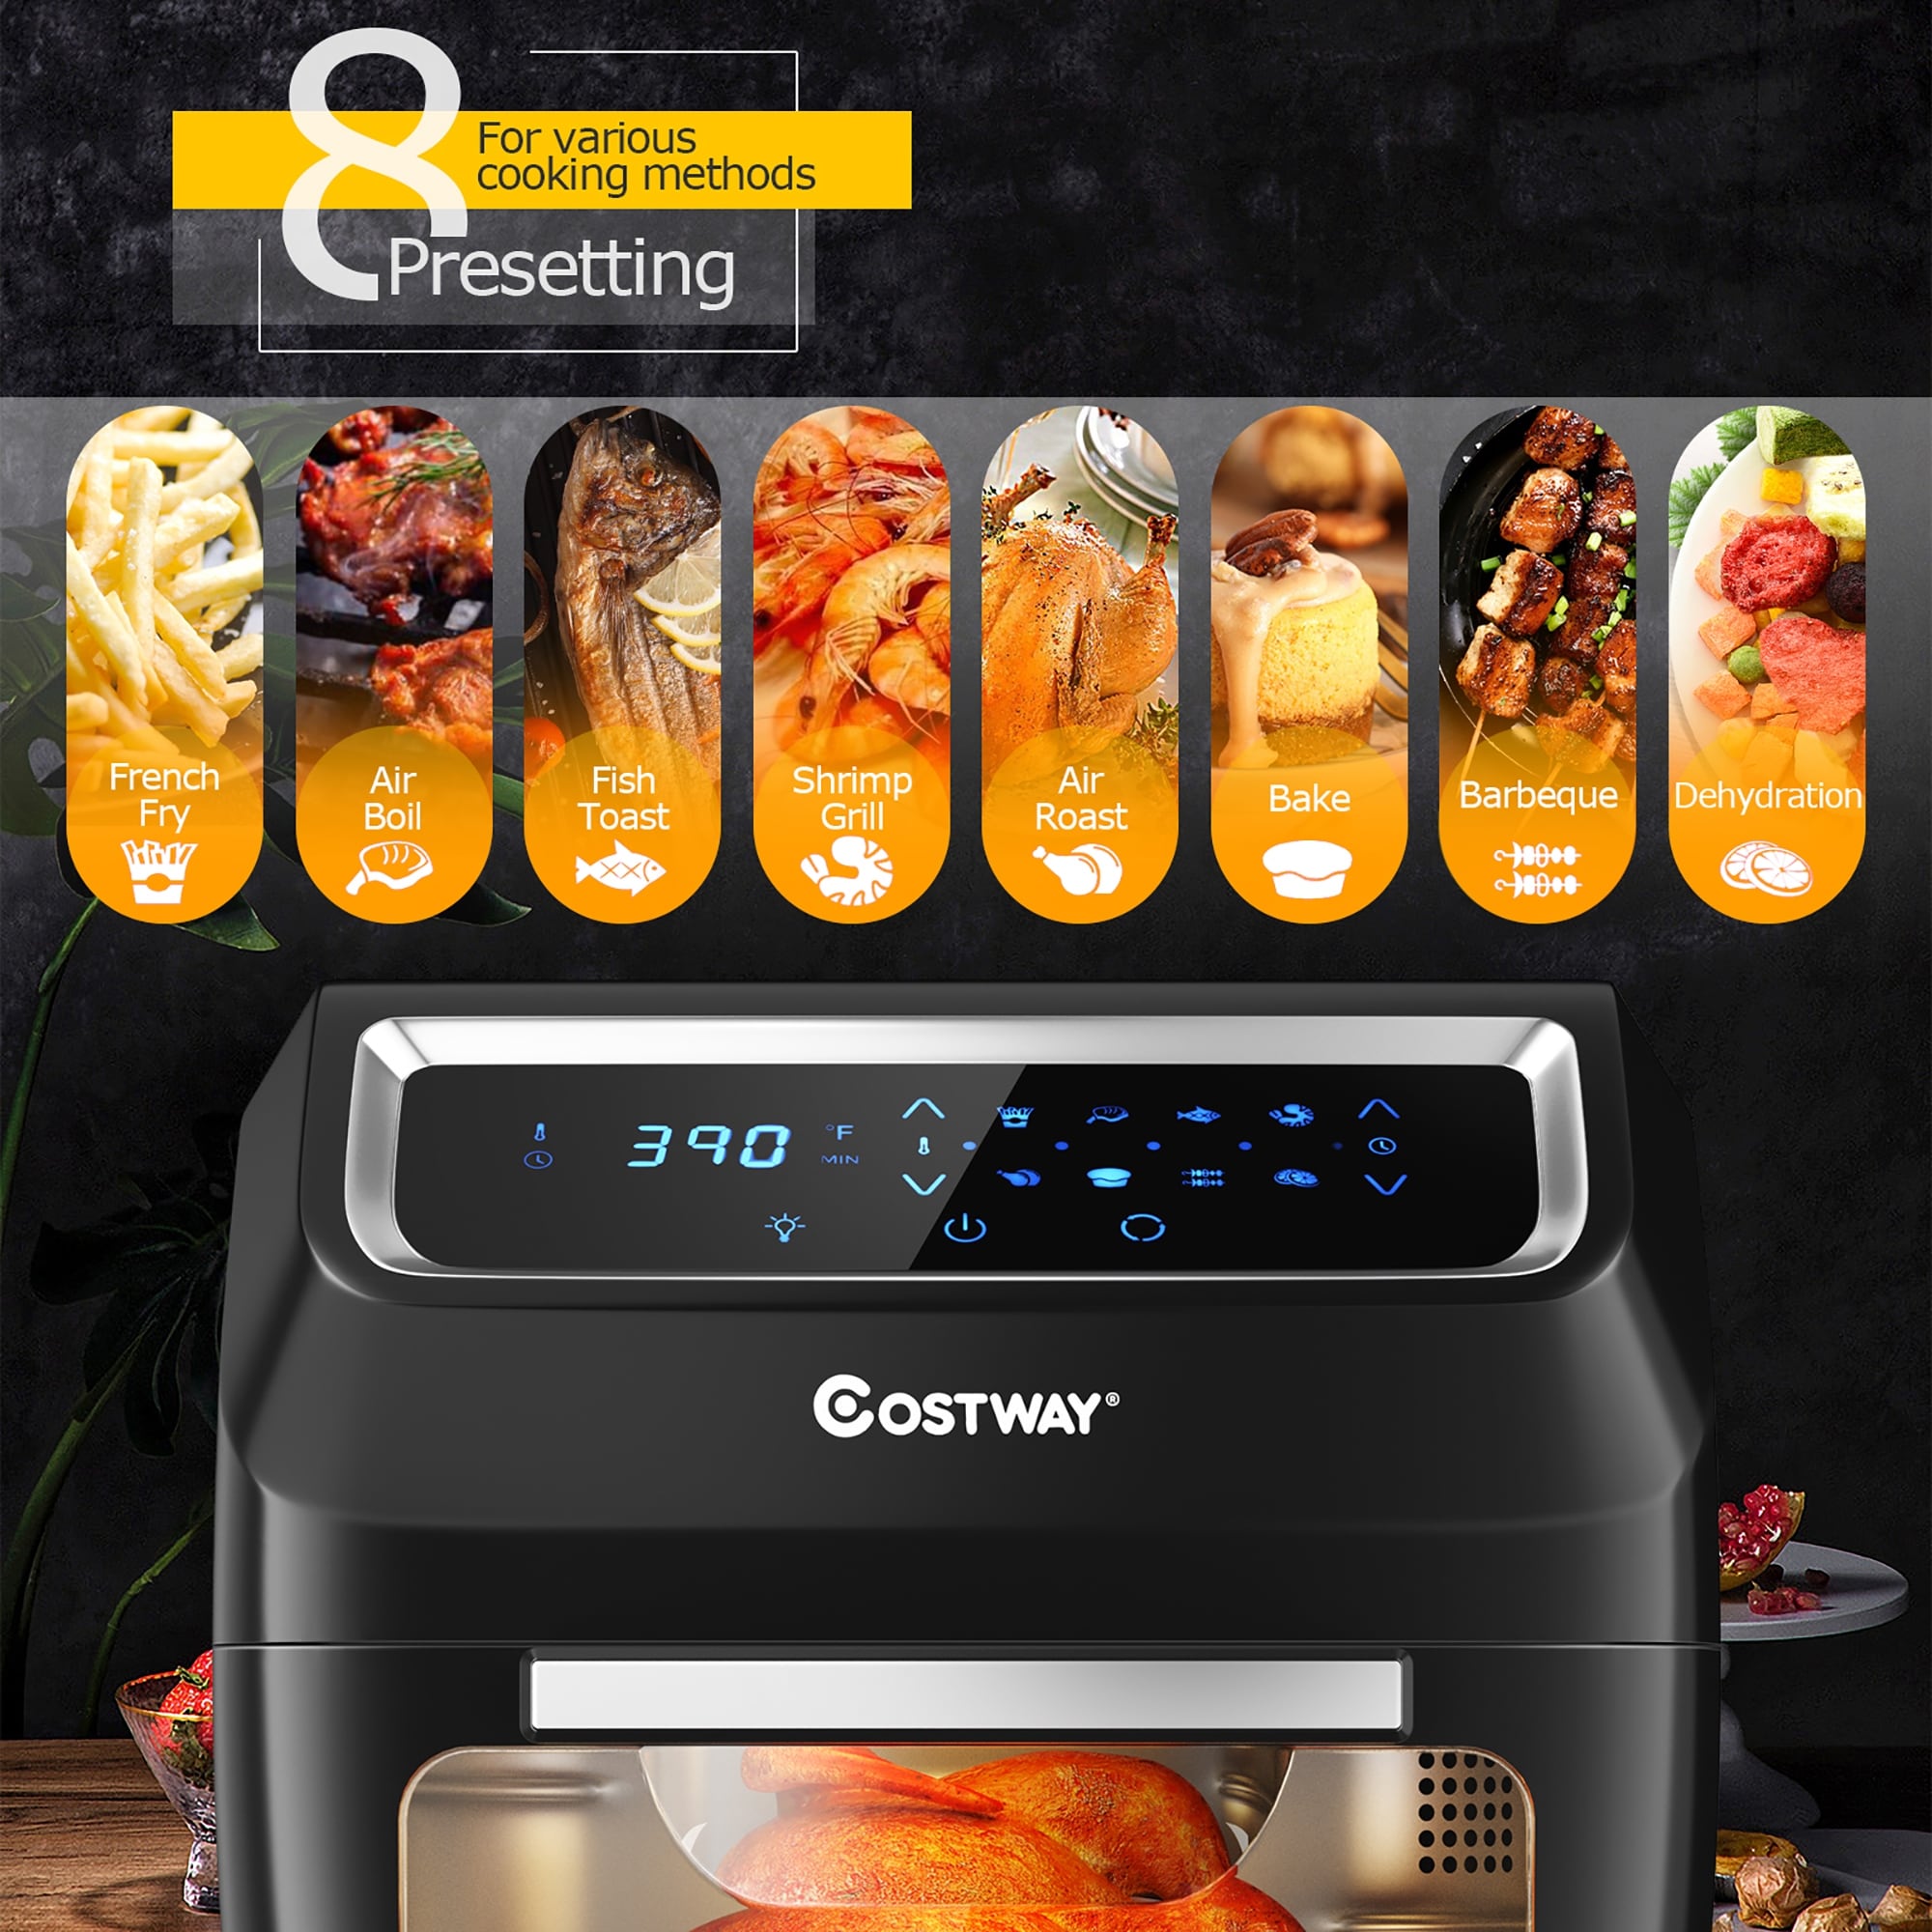 https://ak1.ostkcdn.com/images/products/is/images/direct/015be114defc5bbb1f3bc0c513cac67f718b10f6/Costway-1700W-Electric-Air-Fryer-Oven-8-In-1-Rotisserie-Dehydrator.jpg